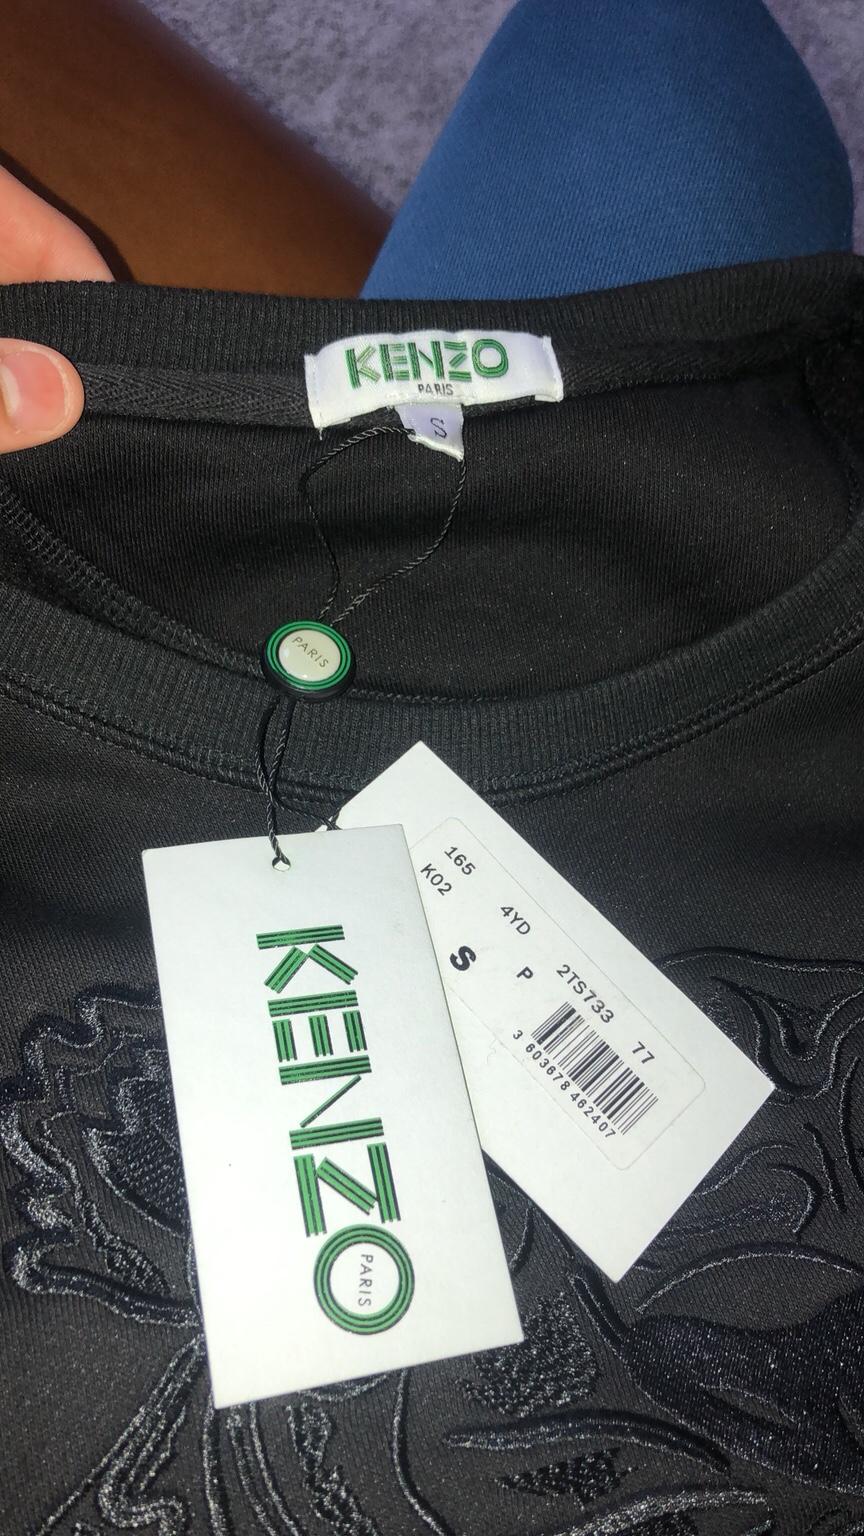 real kenzo label